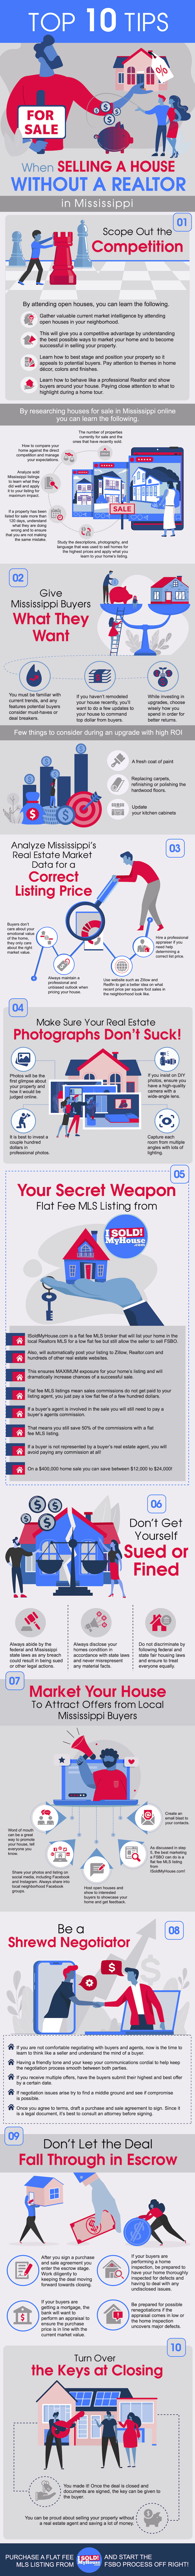 infographic of the 10 steps to sell a house in mississippi without an agent